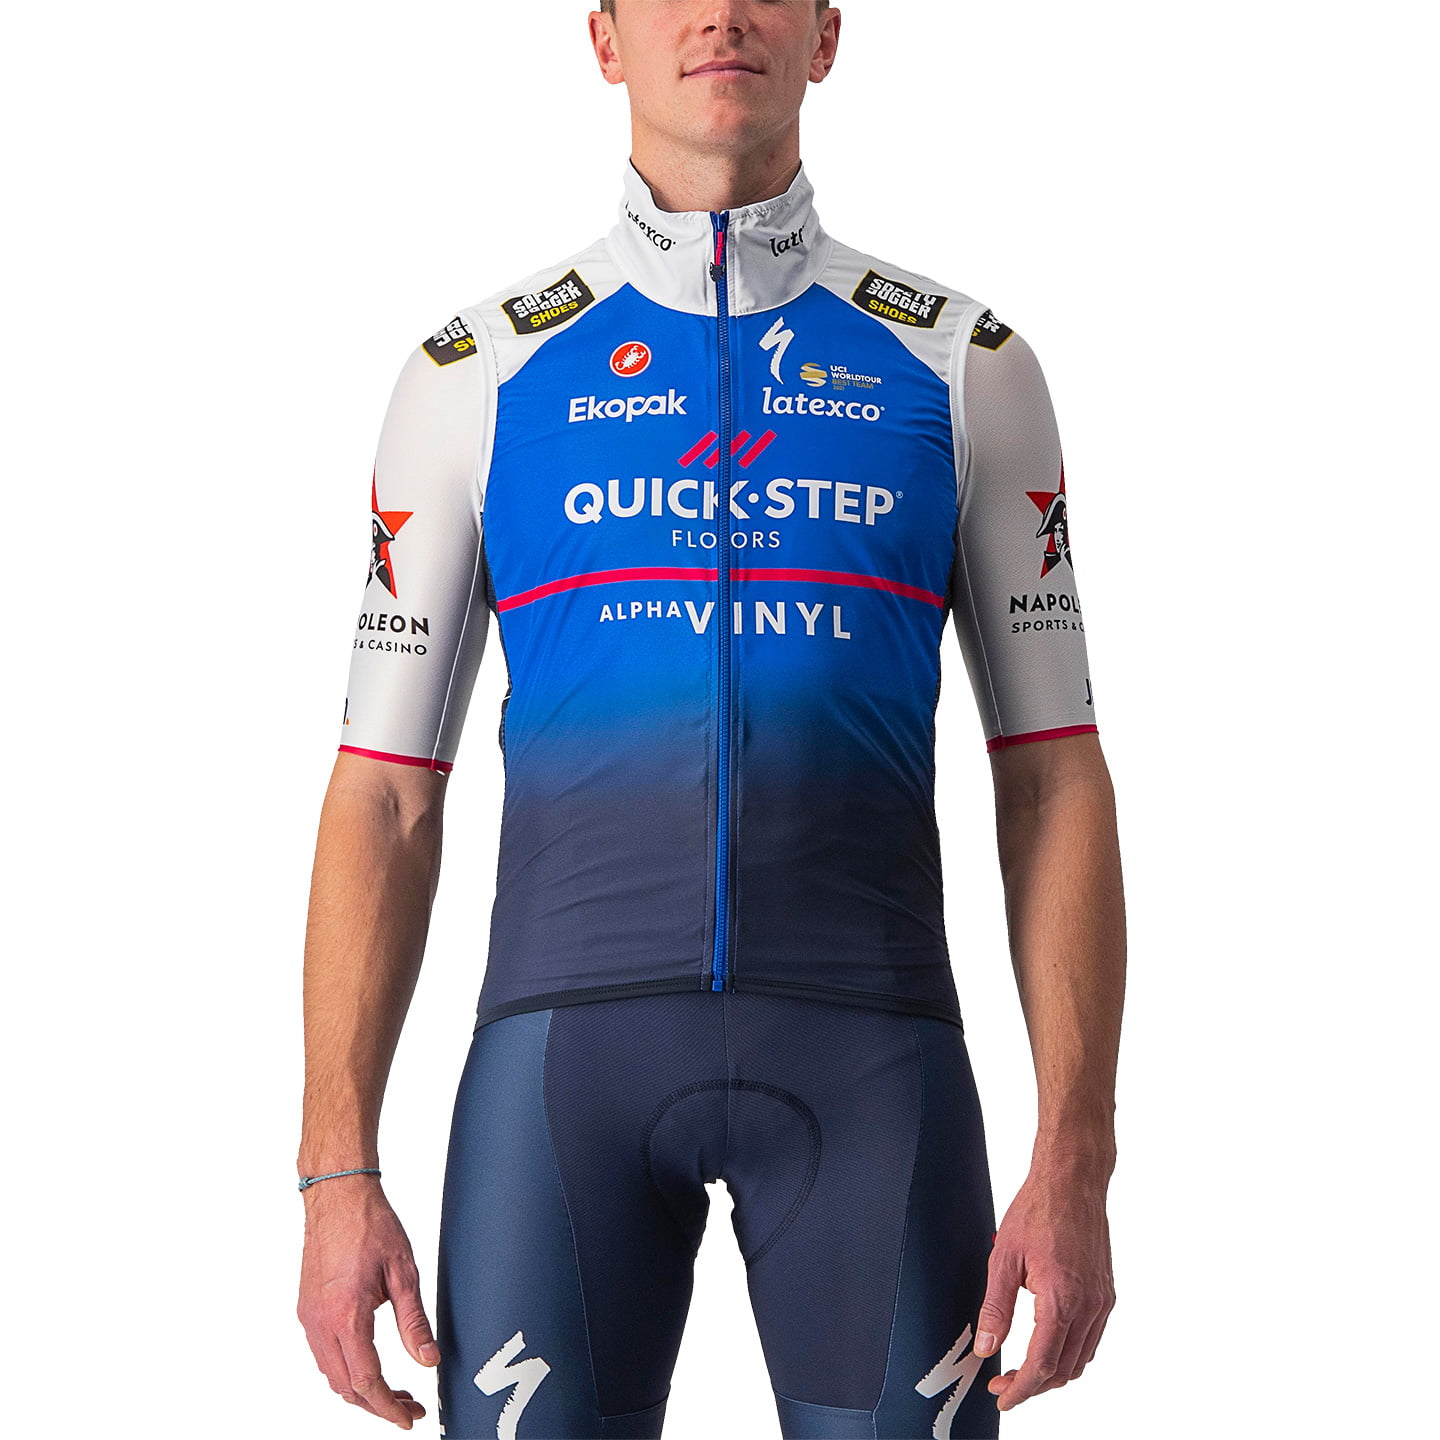 QUICK-STEP ALPHA VINYL 2022 Wind Vest, for men, size S, Cycling vest, Cycling clothing